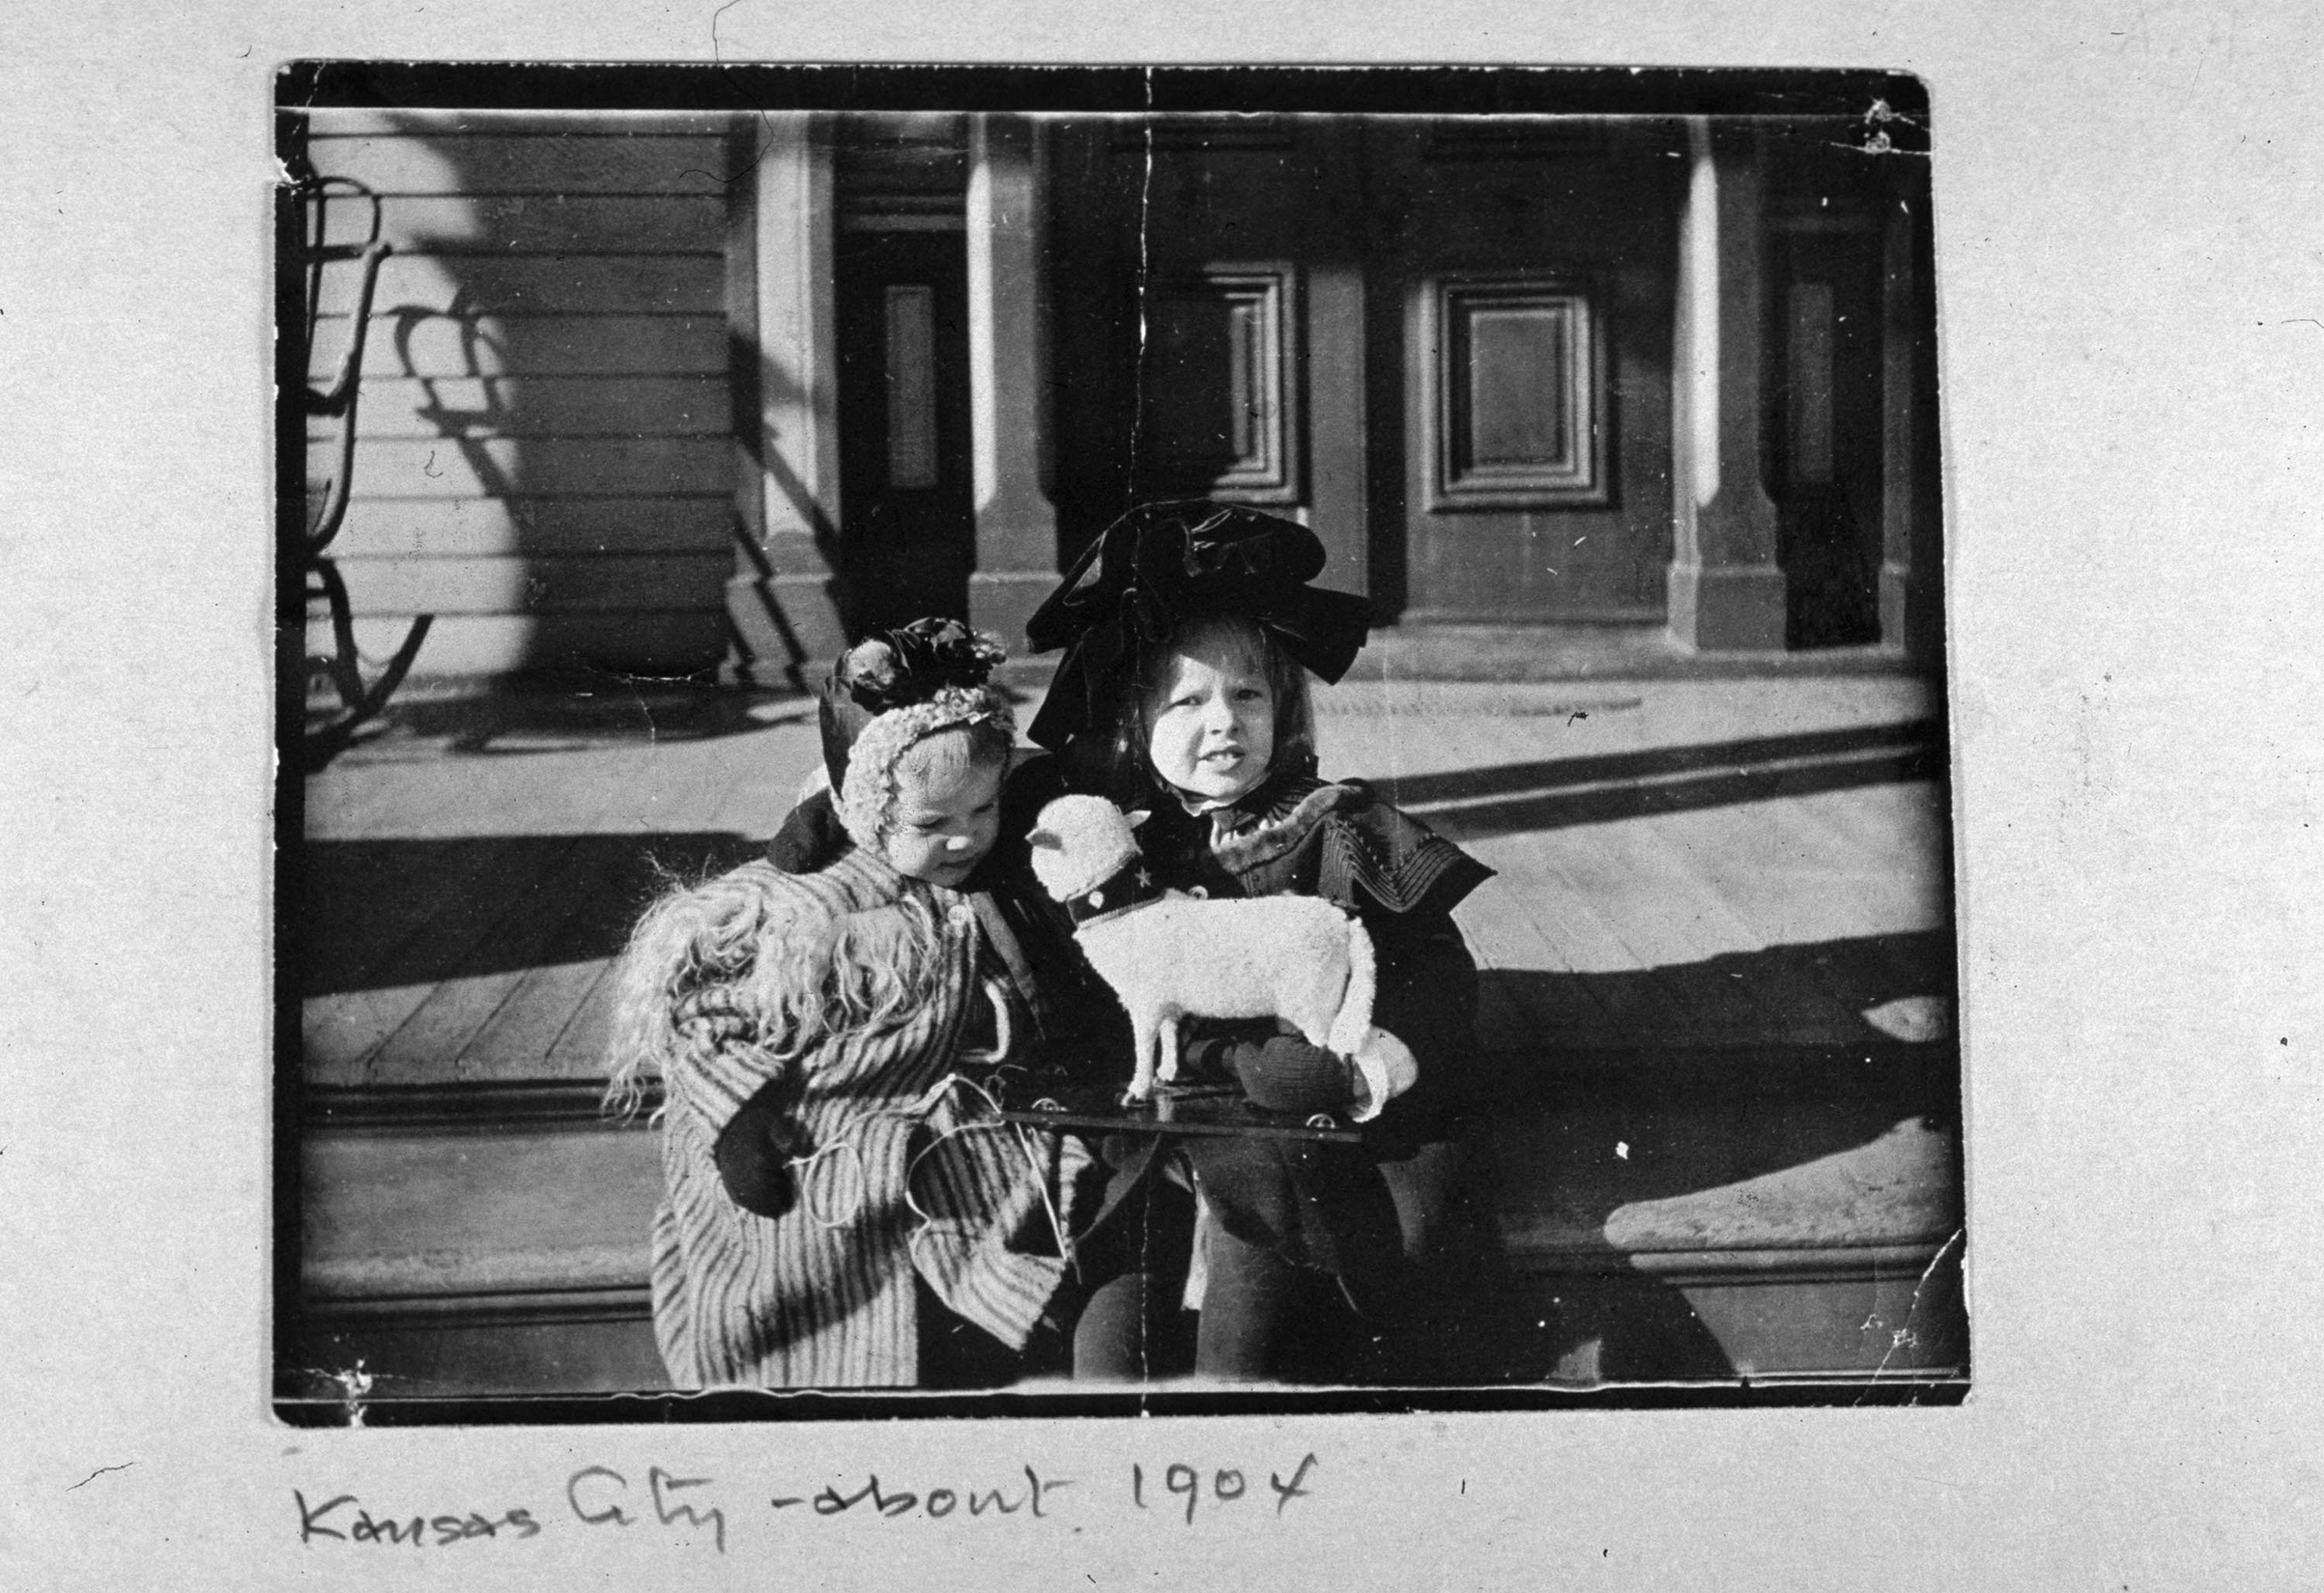 Baby picture of pilot Amelia Earhart with a dog, a toy sled, and her cousin Otis Balis, Kansas City. 1904.